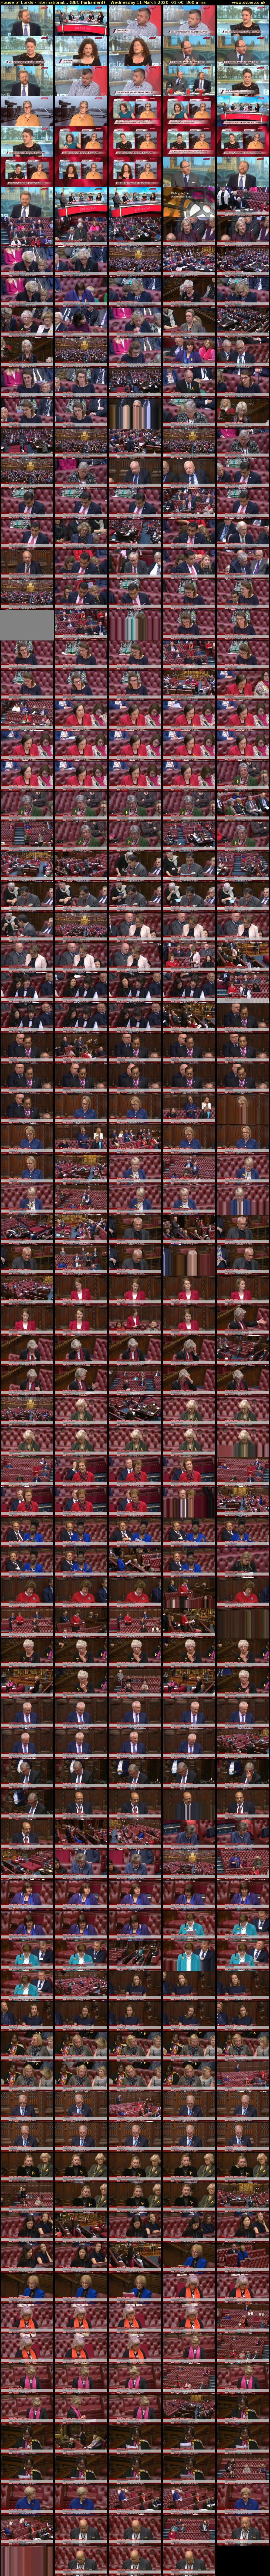 House of Lords - International... (BBC Parliament) Wednesday 11 March 2020 01:00 - 06:00